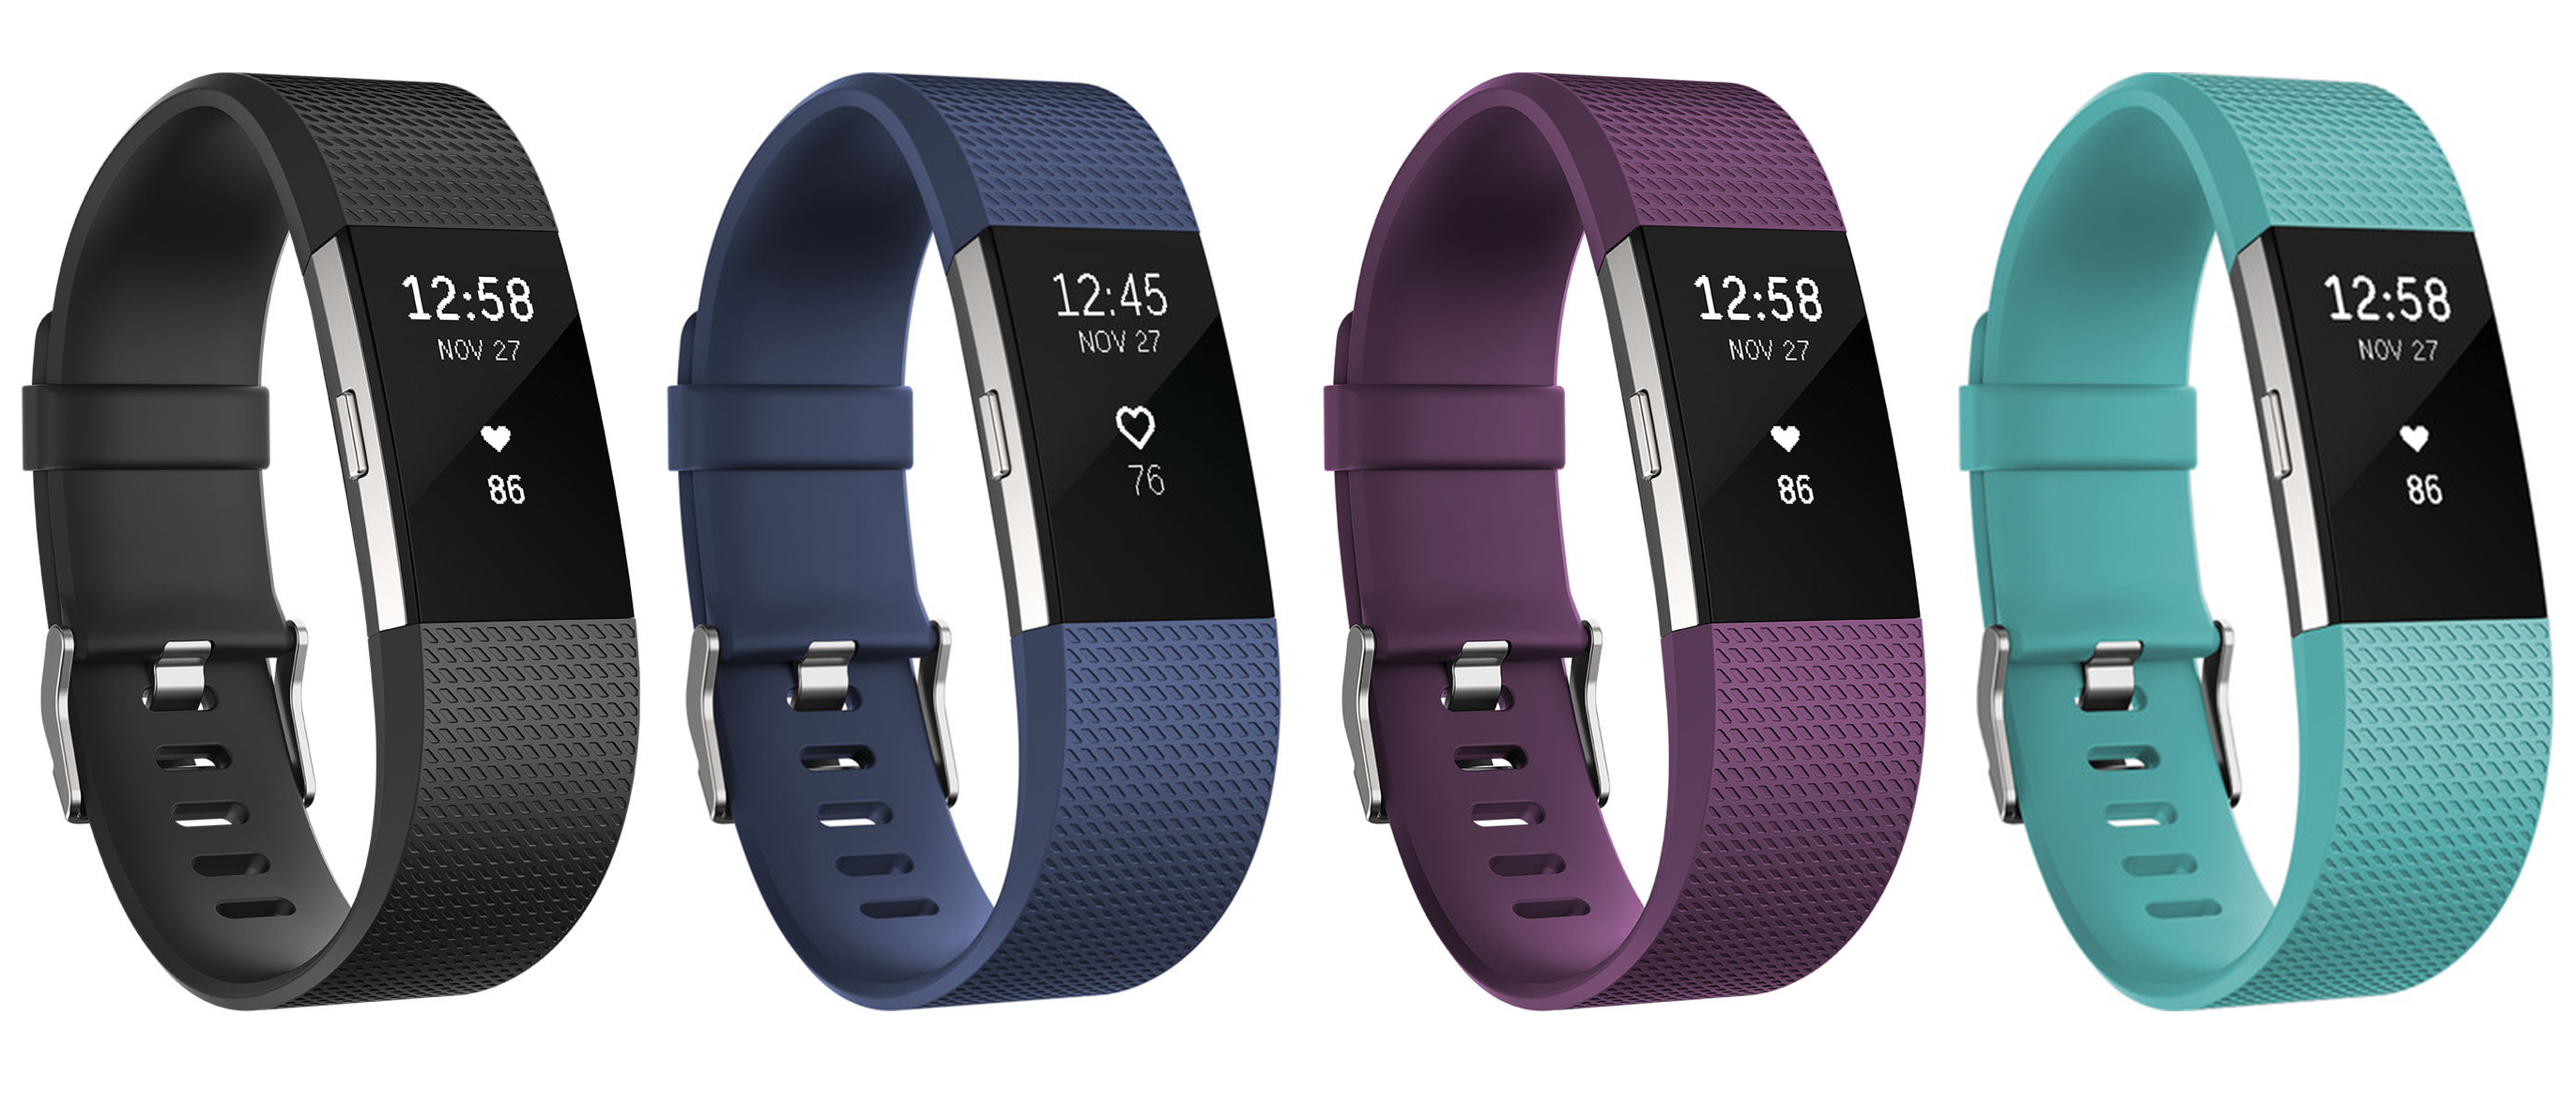 best black friday deals 2015 for fitbits